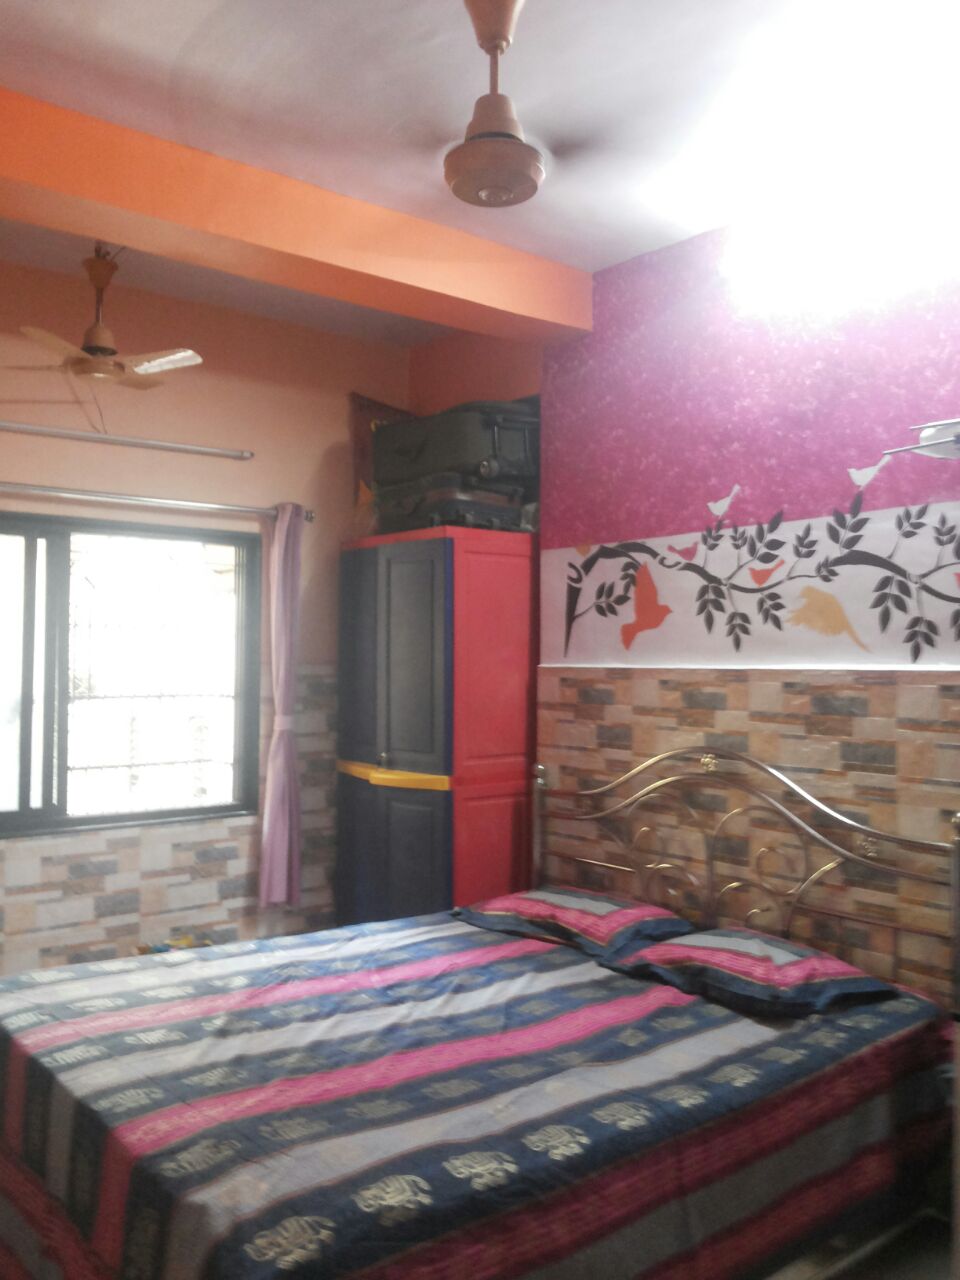 Residential Multistorey Apartment for Sale in Gupte Road, Anand Bazar , Dombivli-West, Mumbai